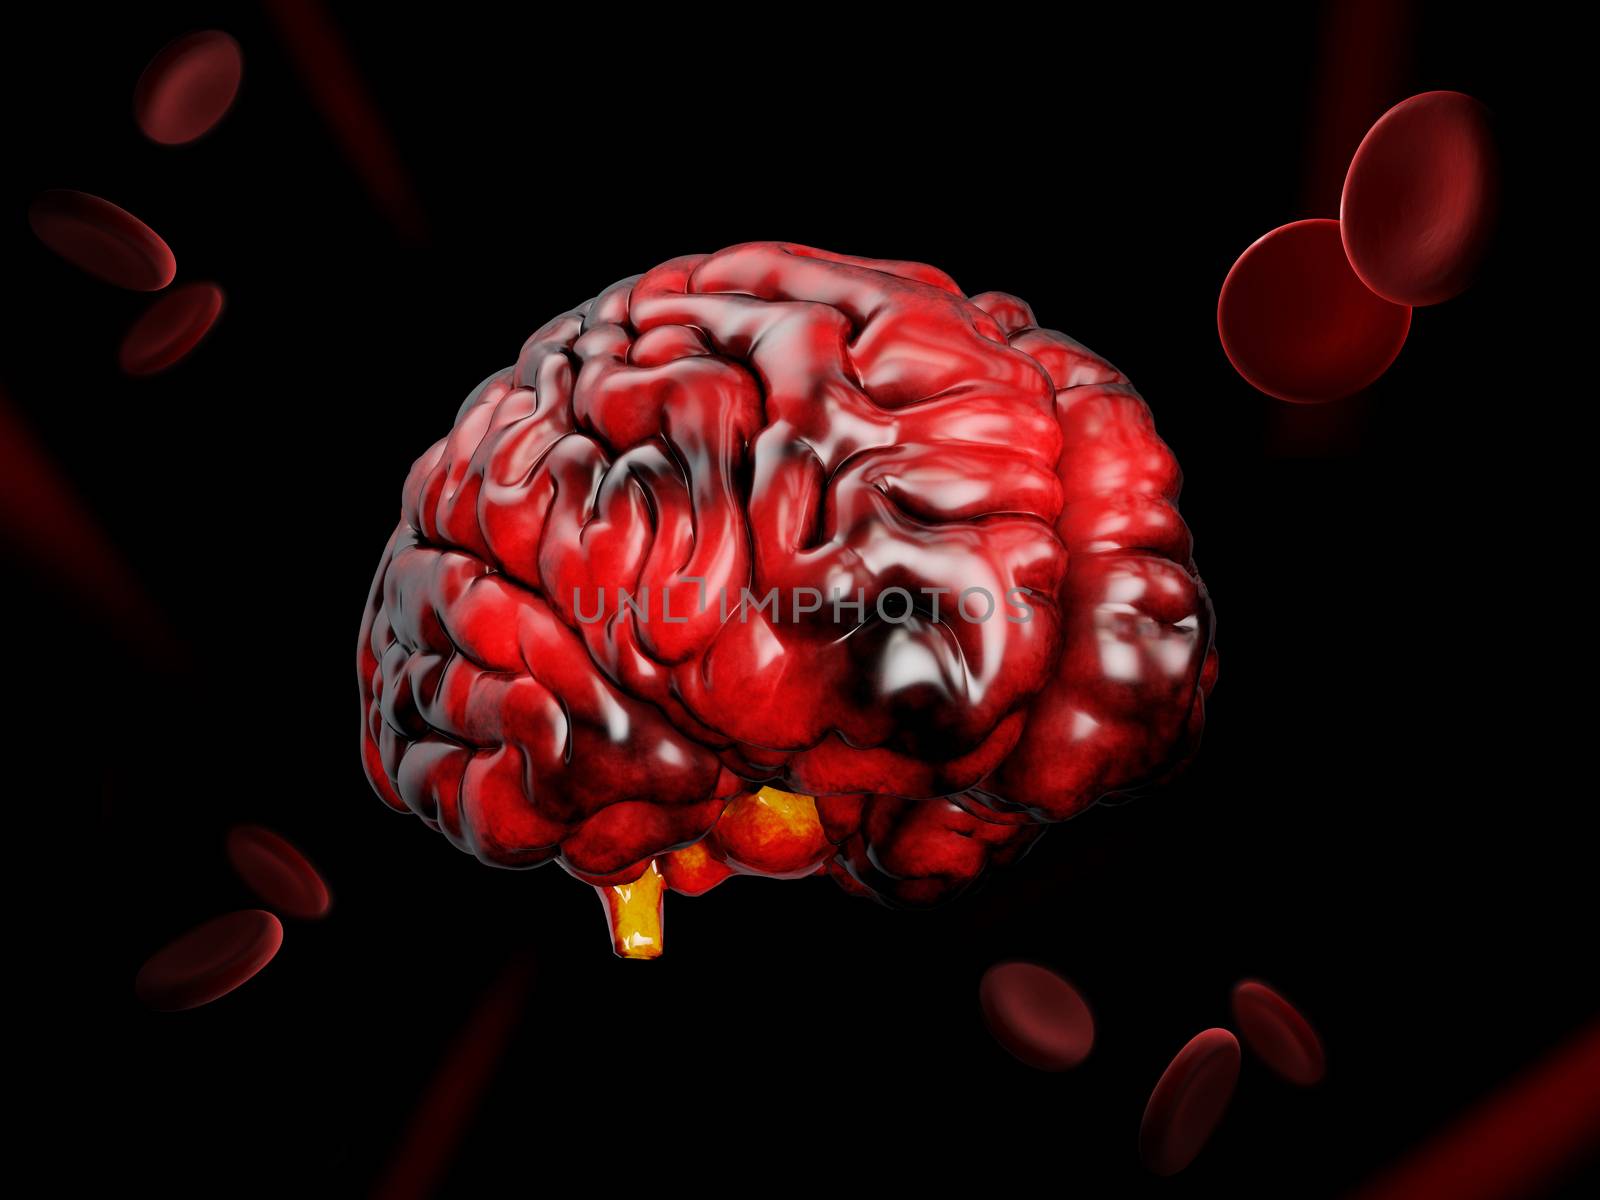 3d Illustration of model of human brain on black background by tussik